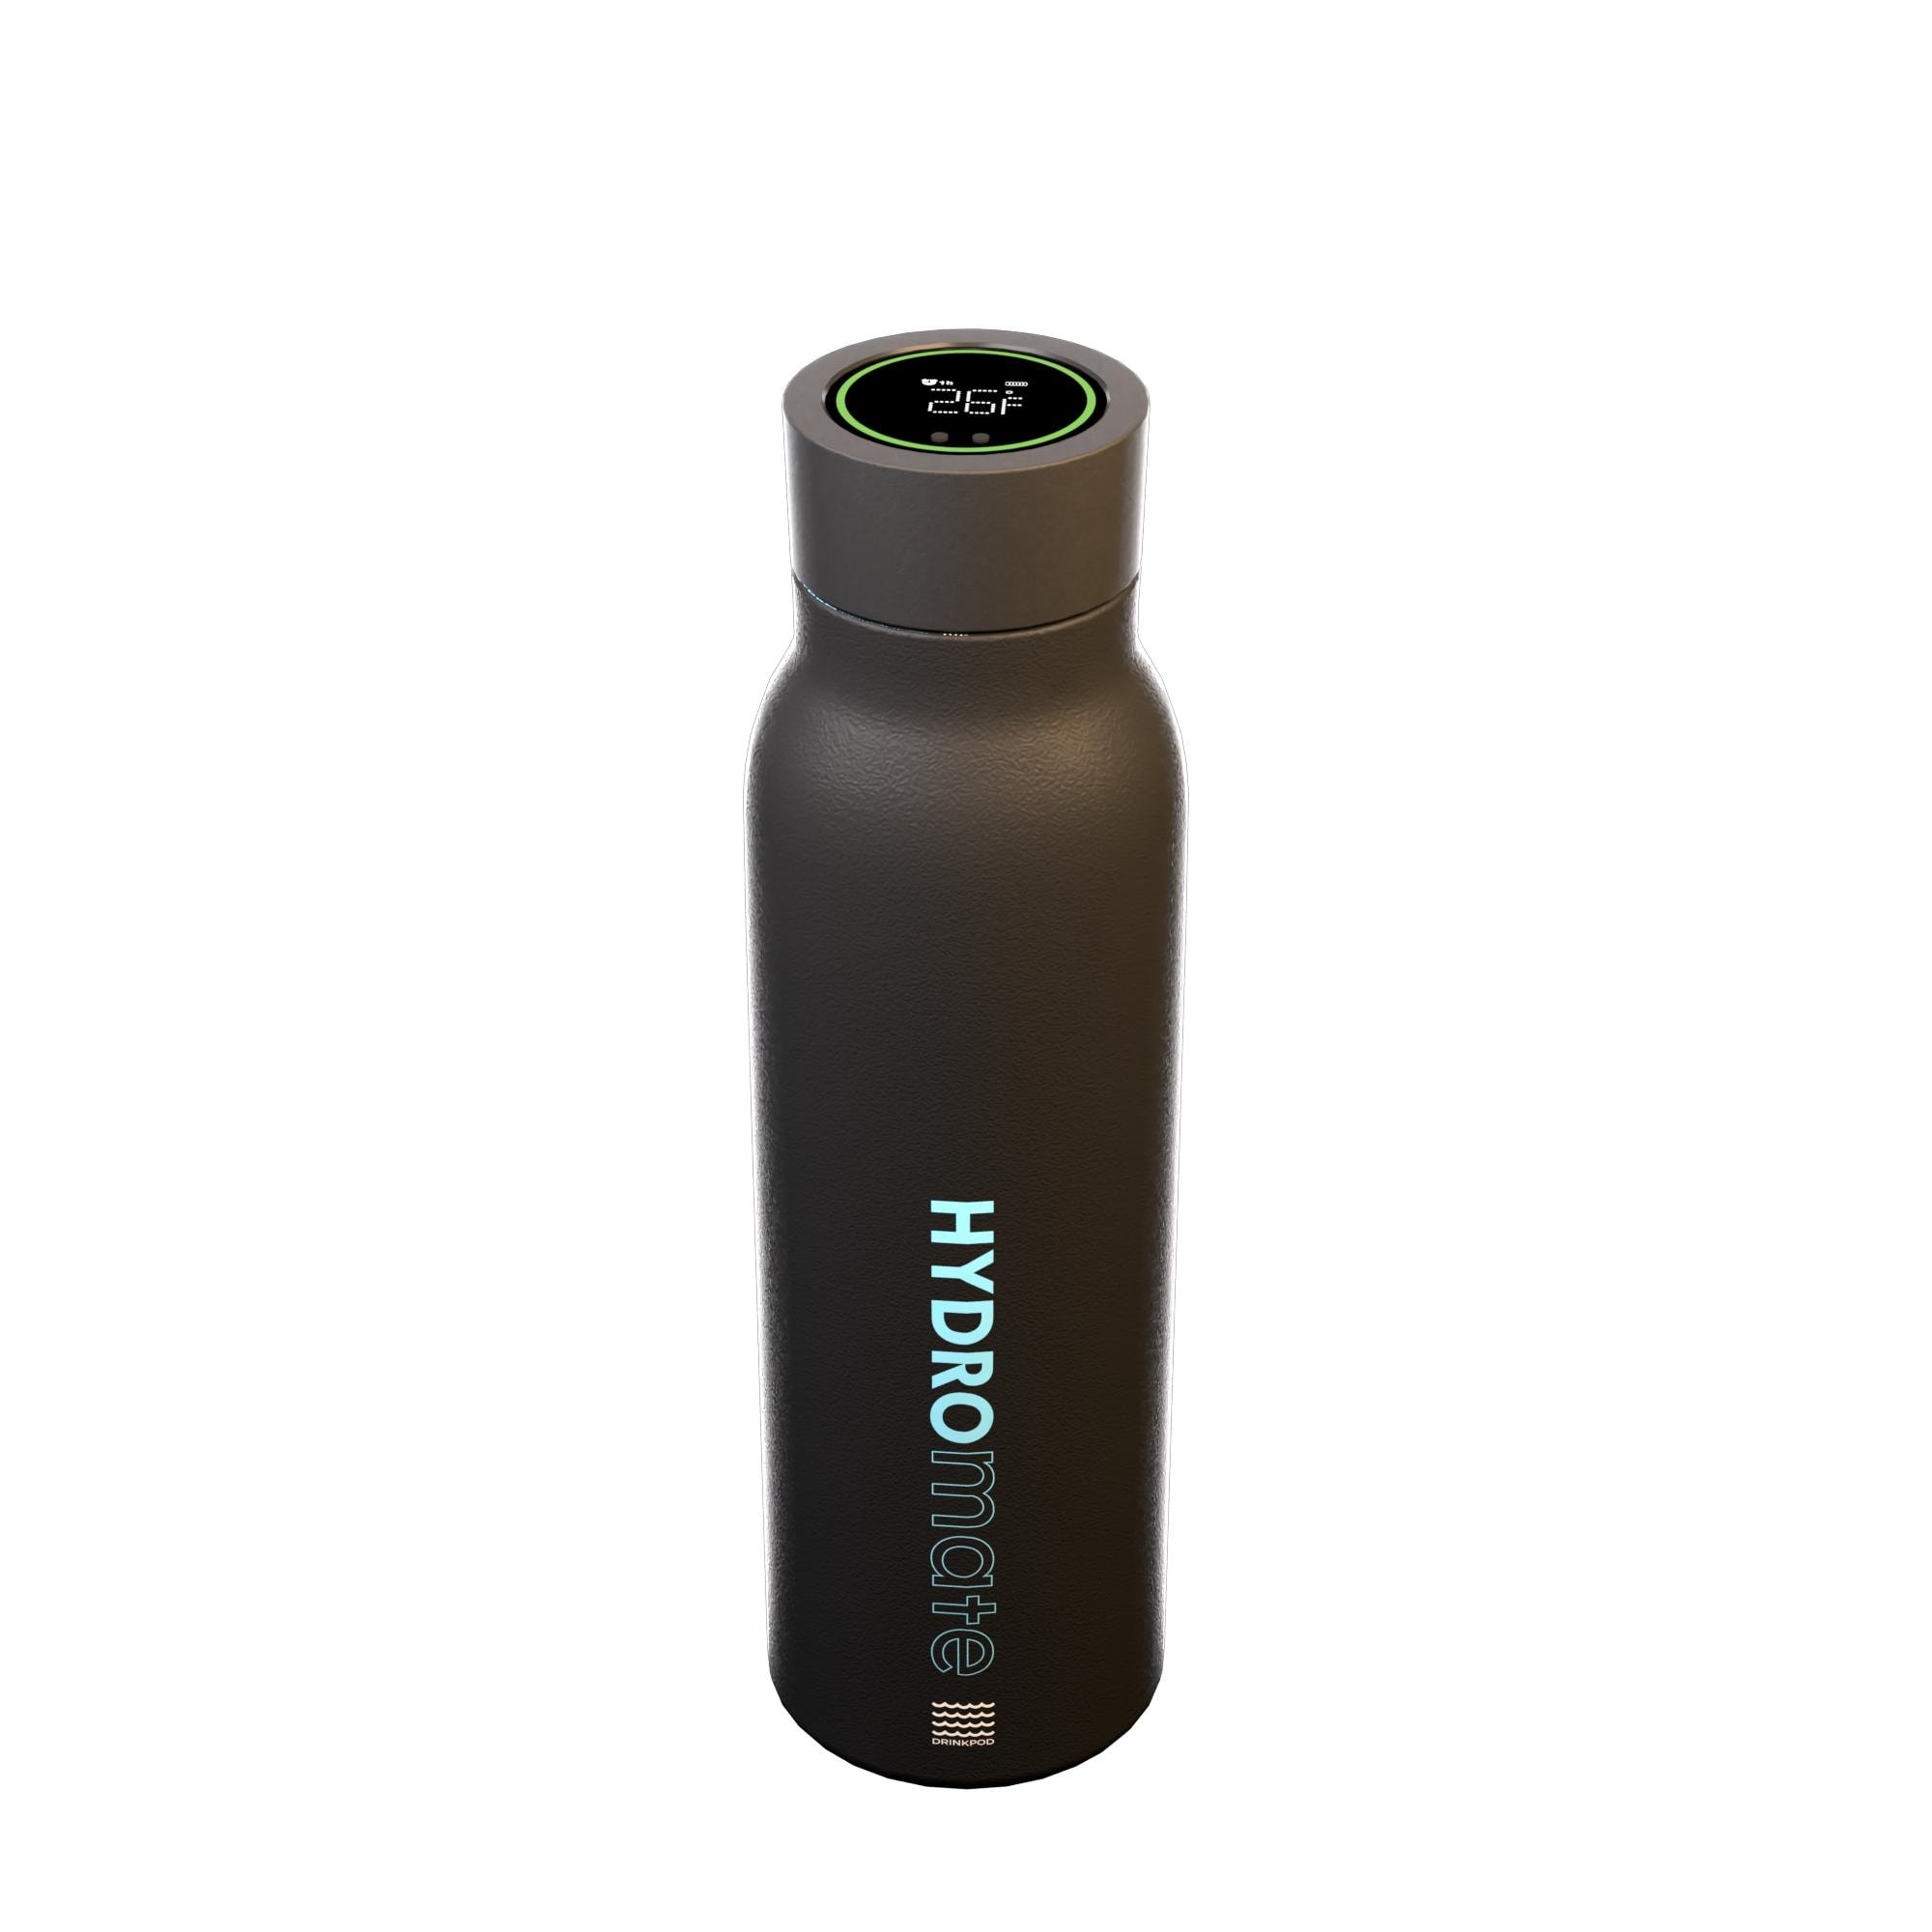 https://ak1.ostkcdn.com/images/products/is/images/direct/dcbb9e7e2636a061e8858c82d6945349afb65868/Hydromate-Smart-Water-Bottle-Stainless-Steel-Double-Wall-Tracks-Water-Intake-%26-Sends-Personalized-Reminders-to-Hydrate.jpg